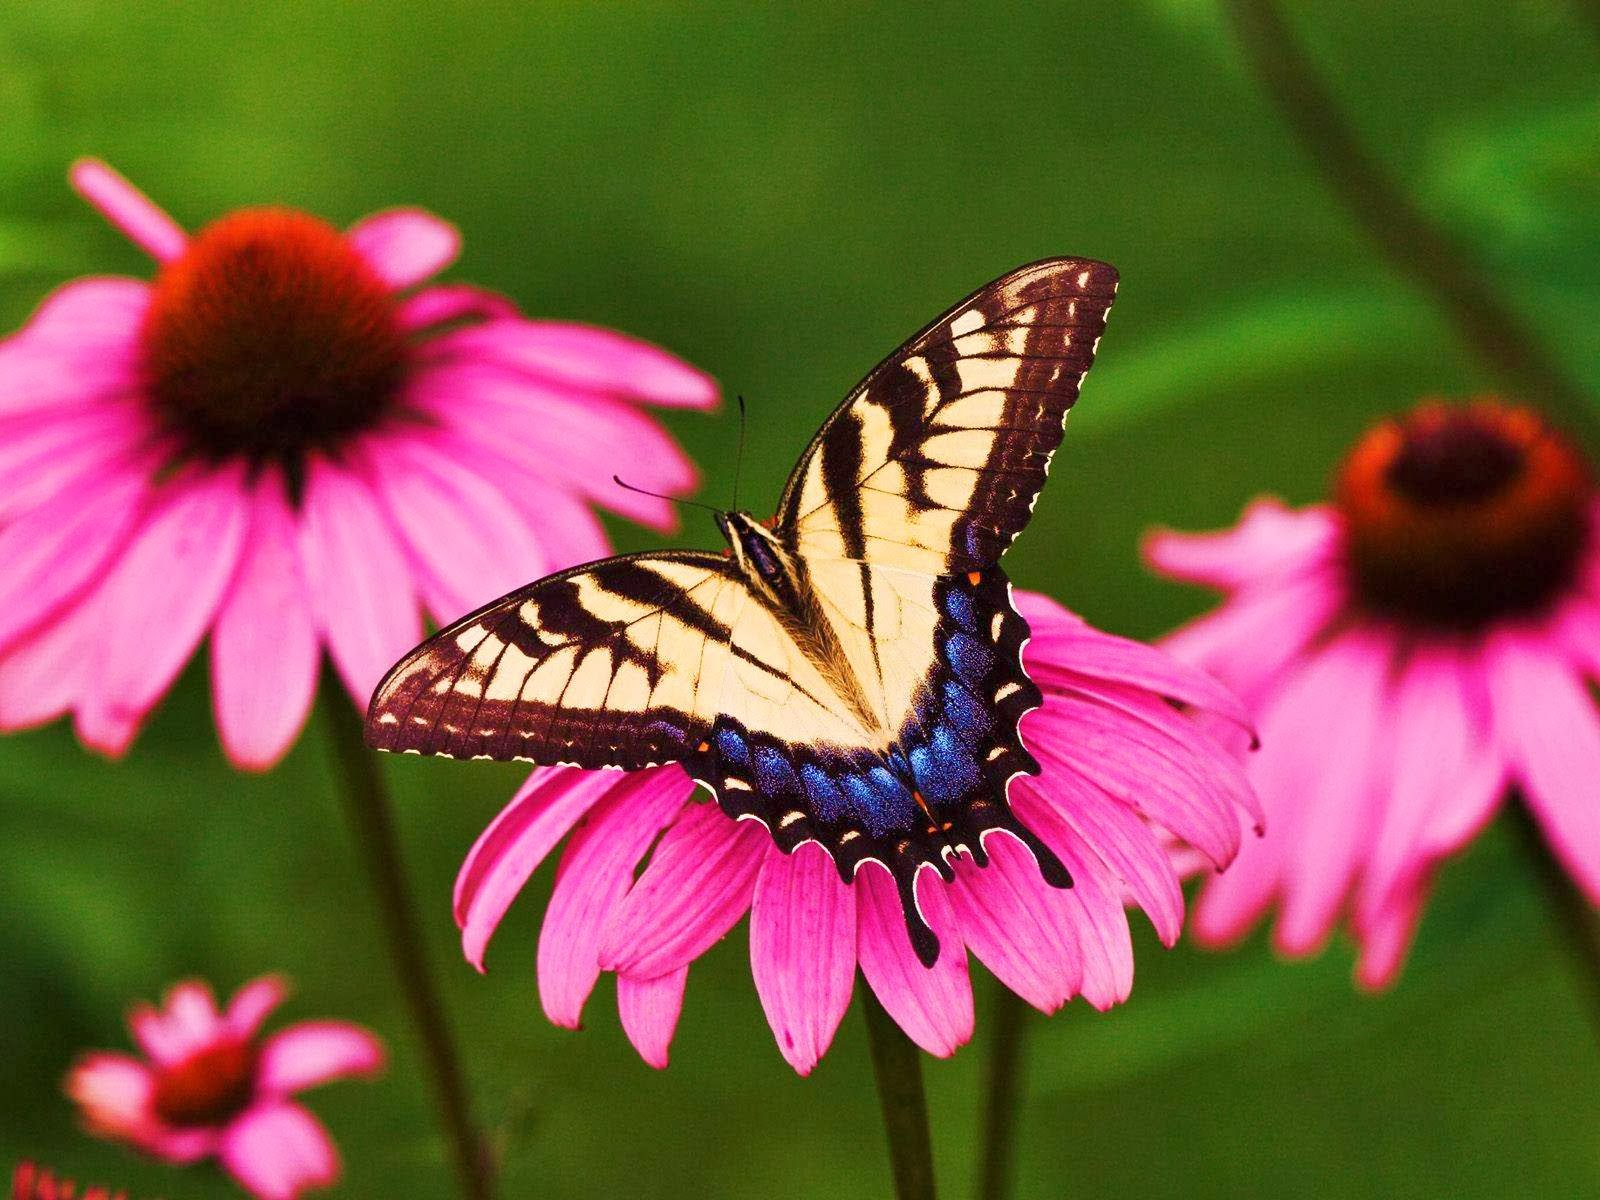 Rules of the Jungle: Symbiotic relationship of butterfly and flower